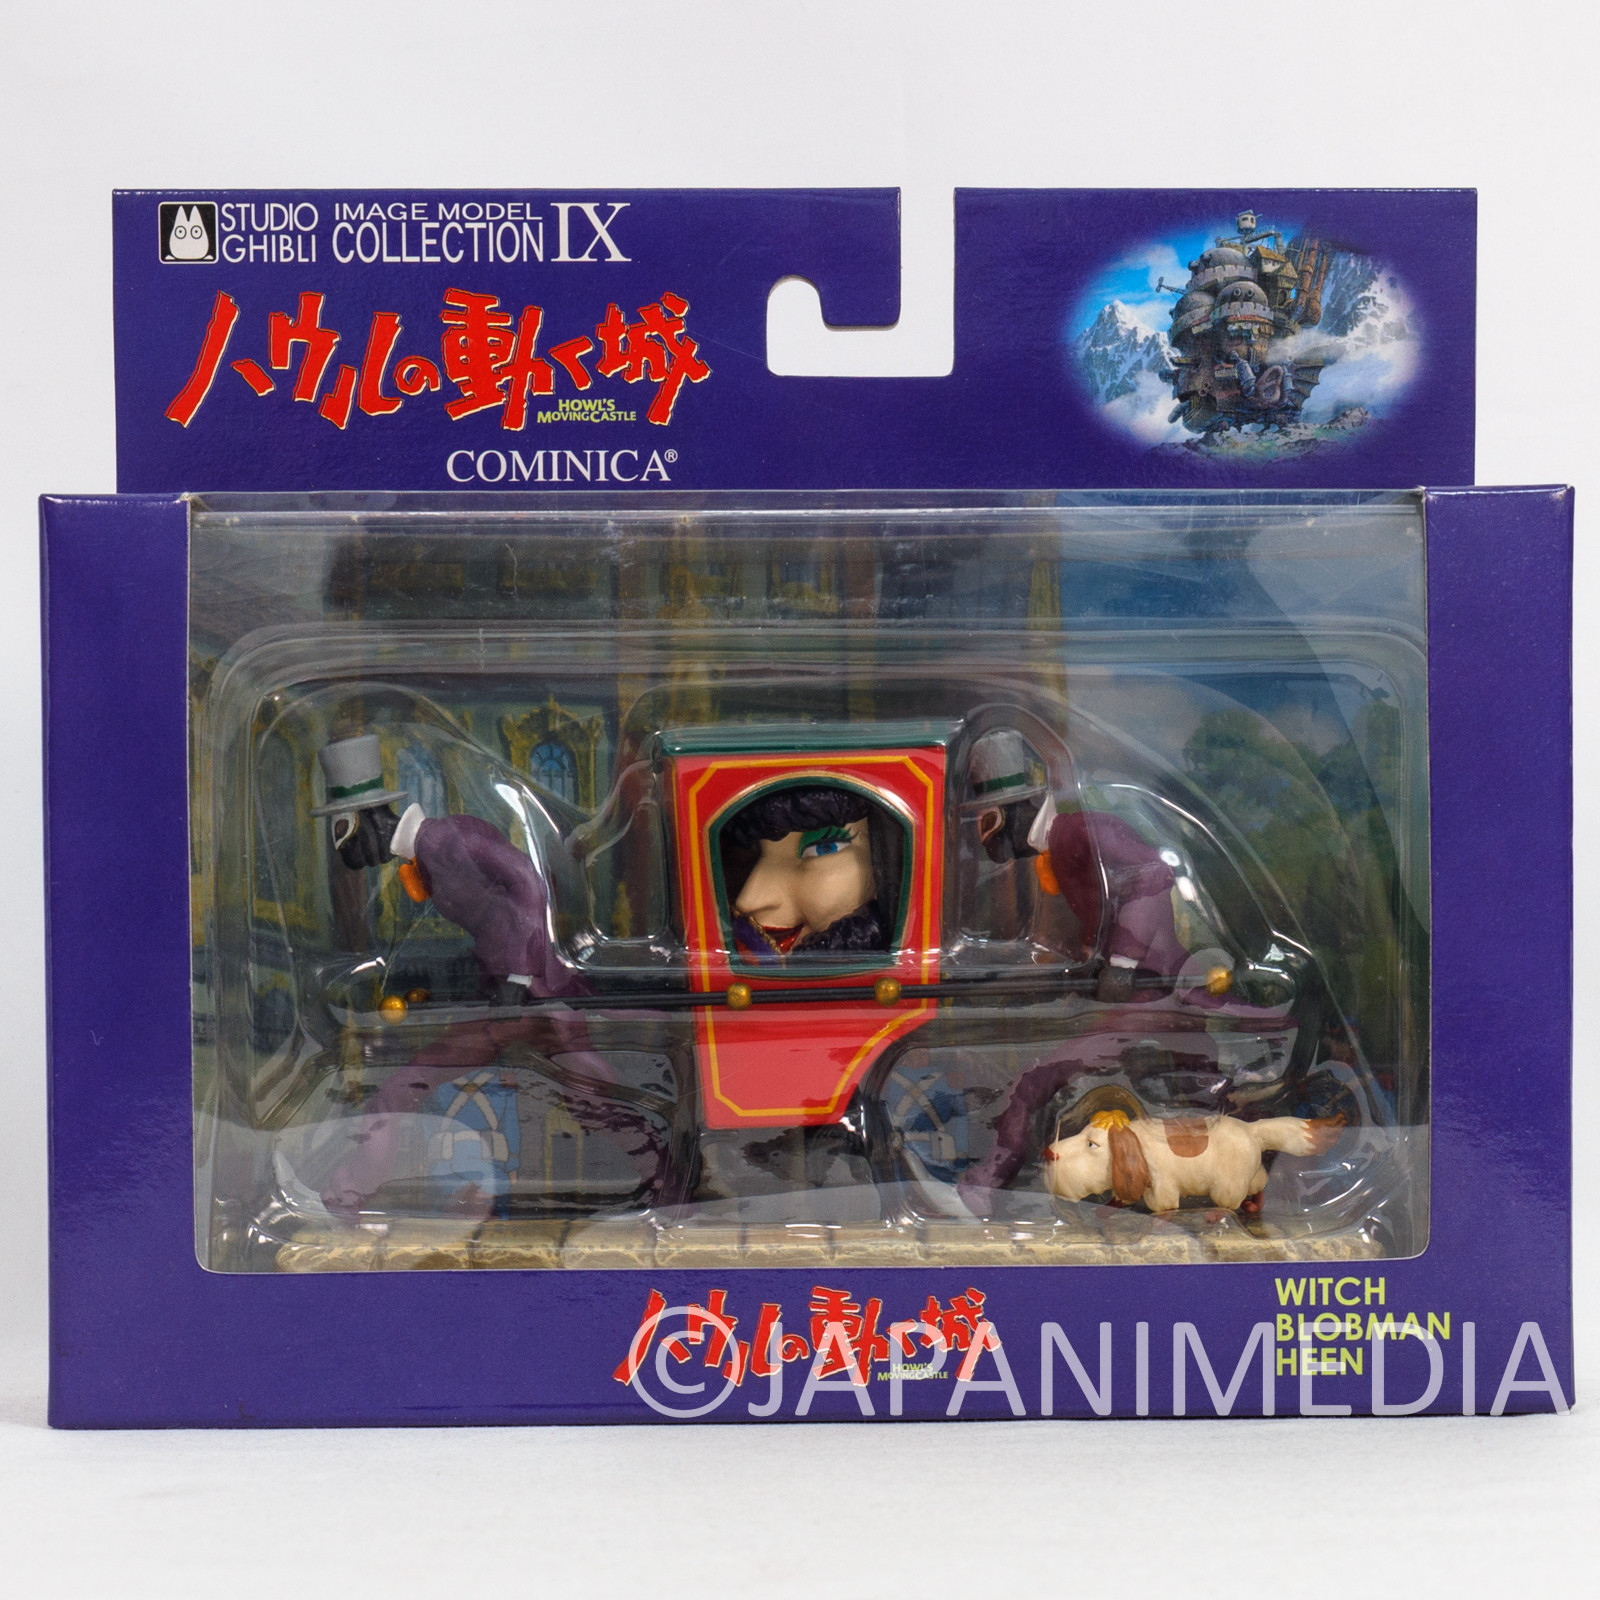 Howl's Moving Castle Image Model Collection Figure Witch Brobman Heen Cominica Ghibli